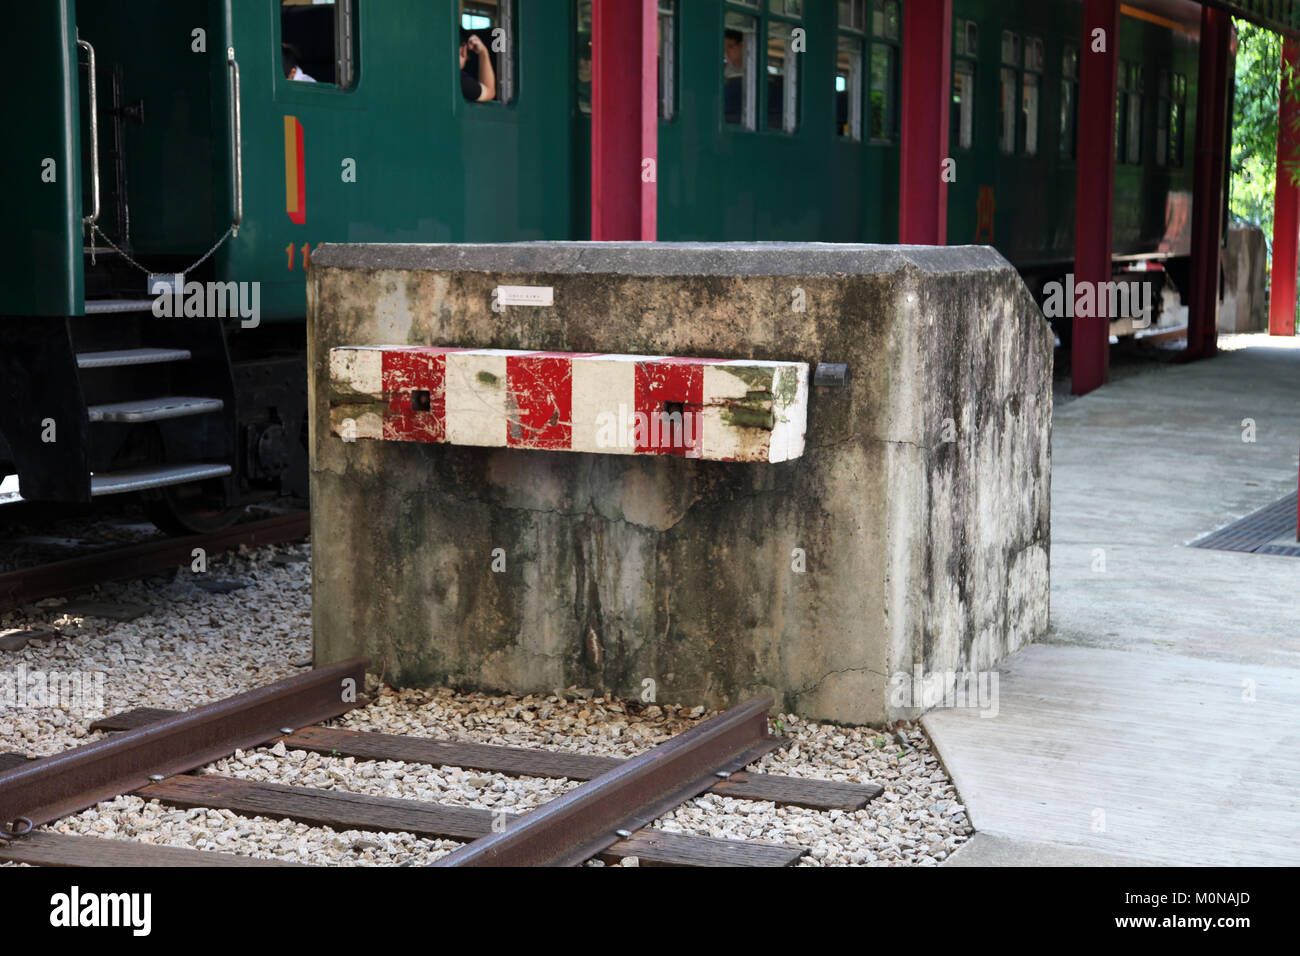 It's a photo of a train bumper  train stopper, train knocker or train stopper in a train station on the railways at the terminus Stock Photo